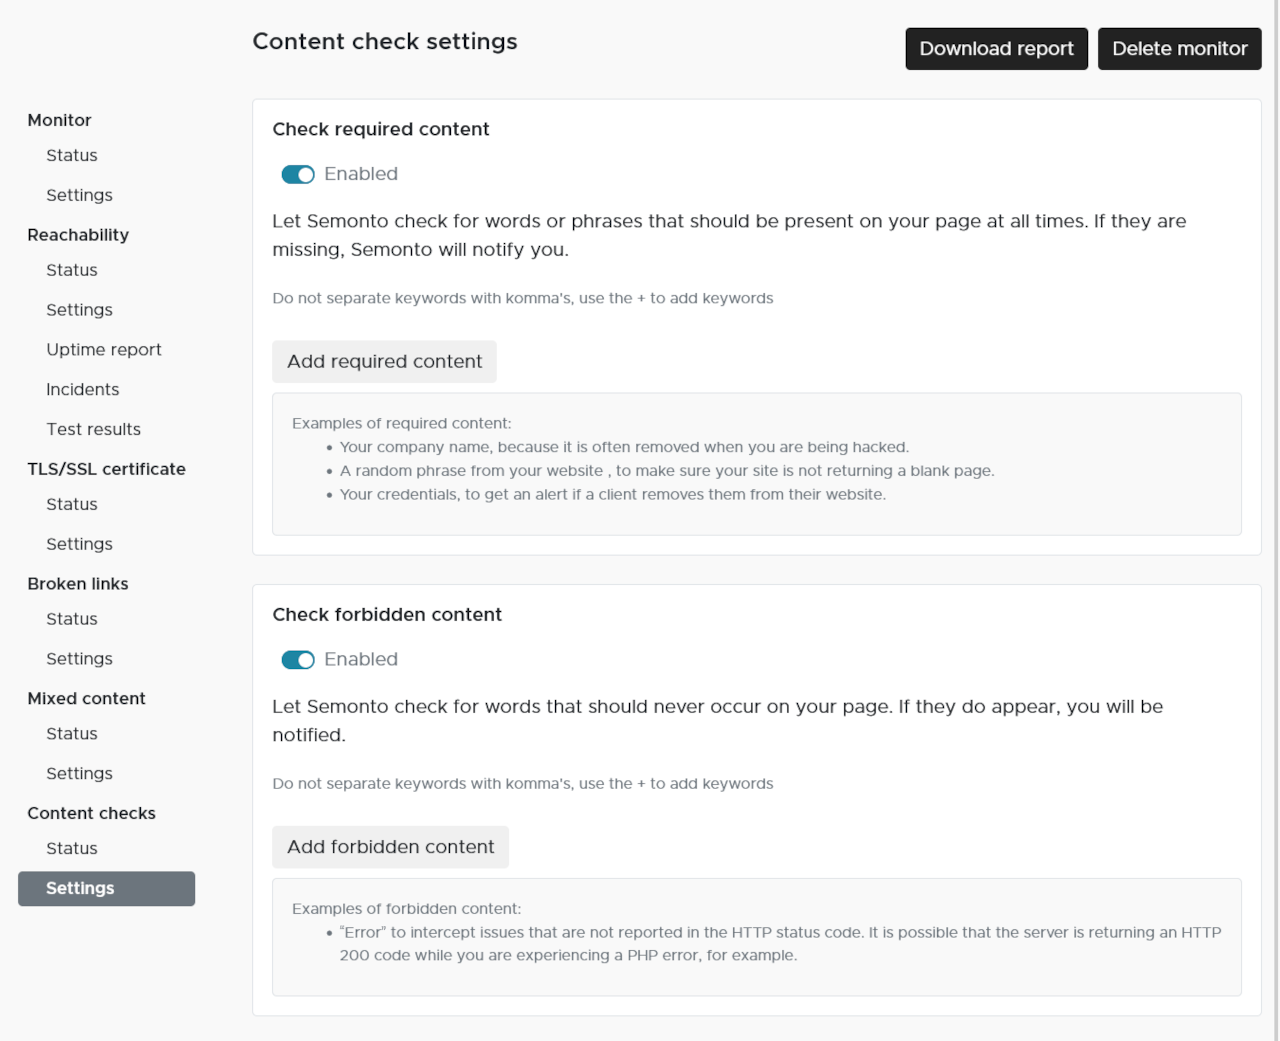 The settings screen for content checks